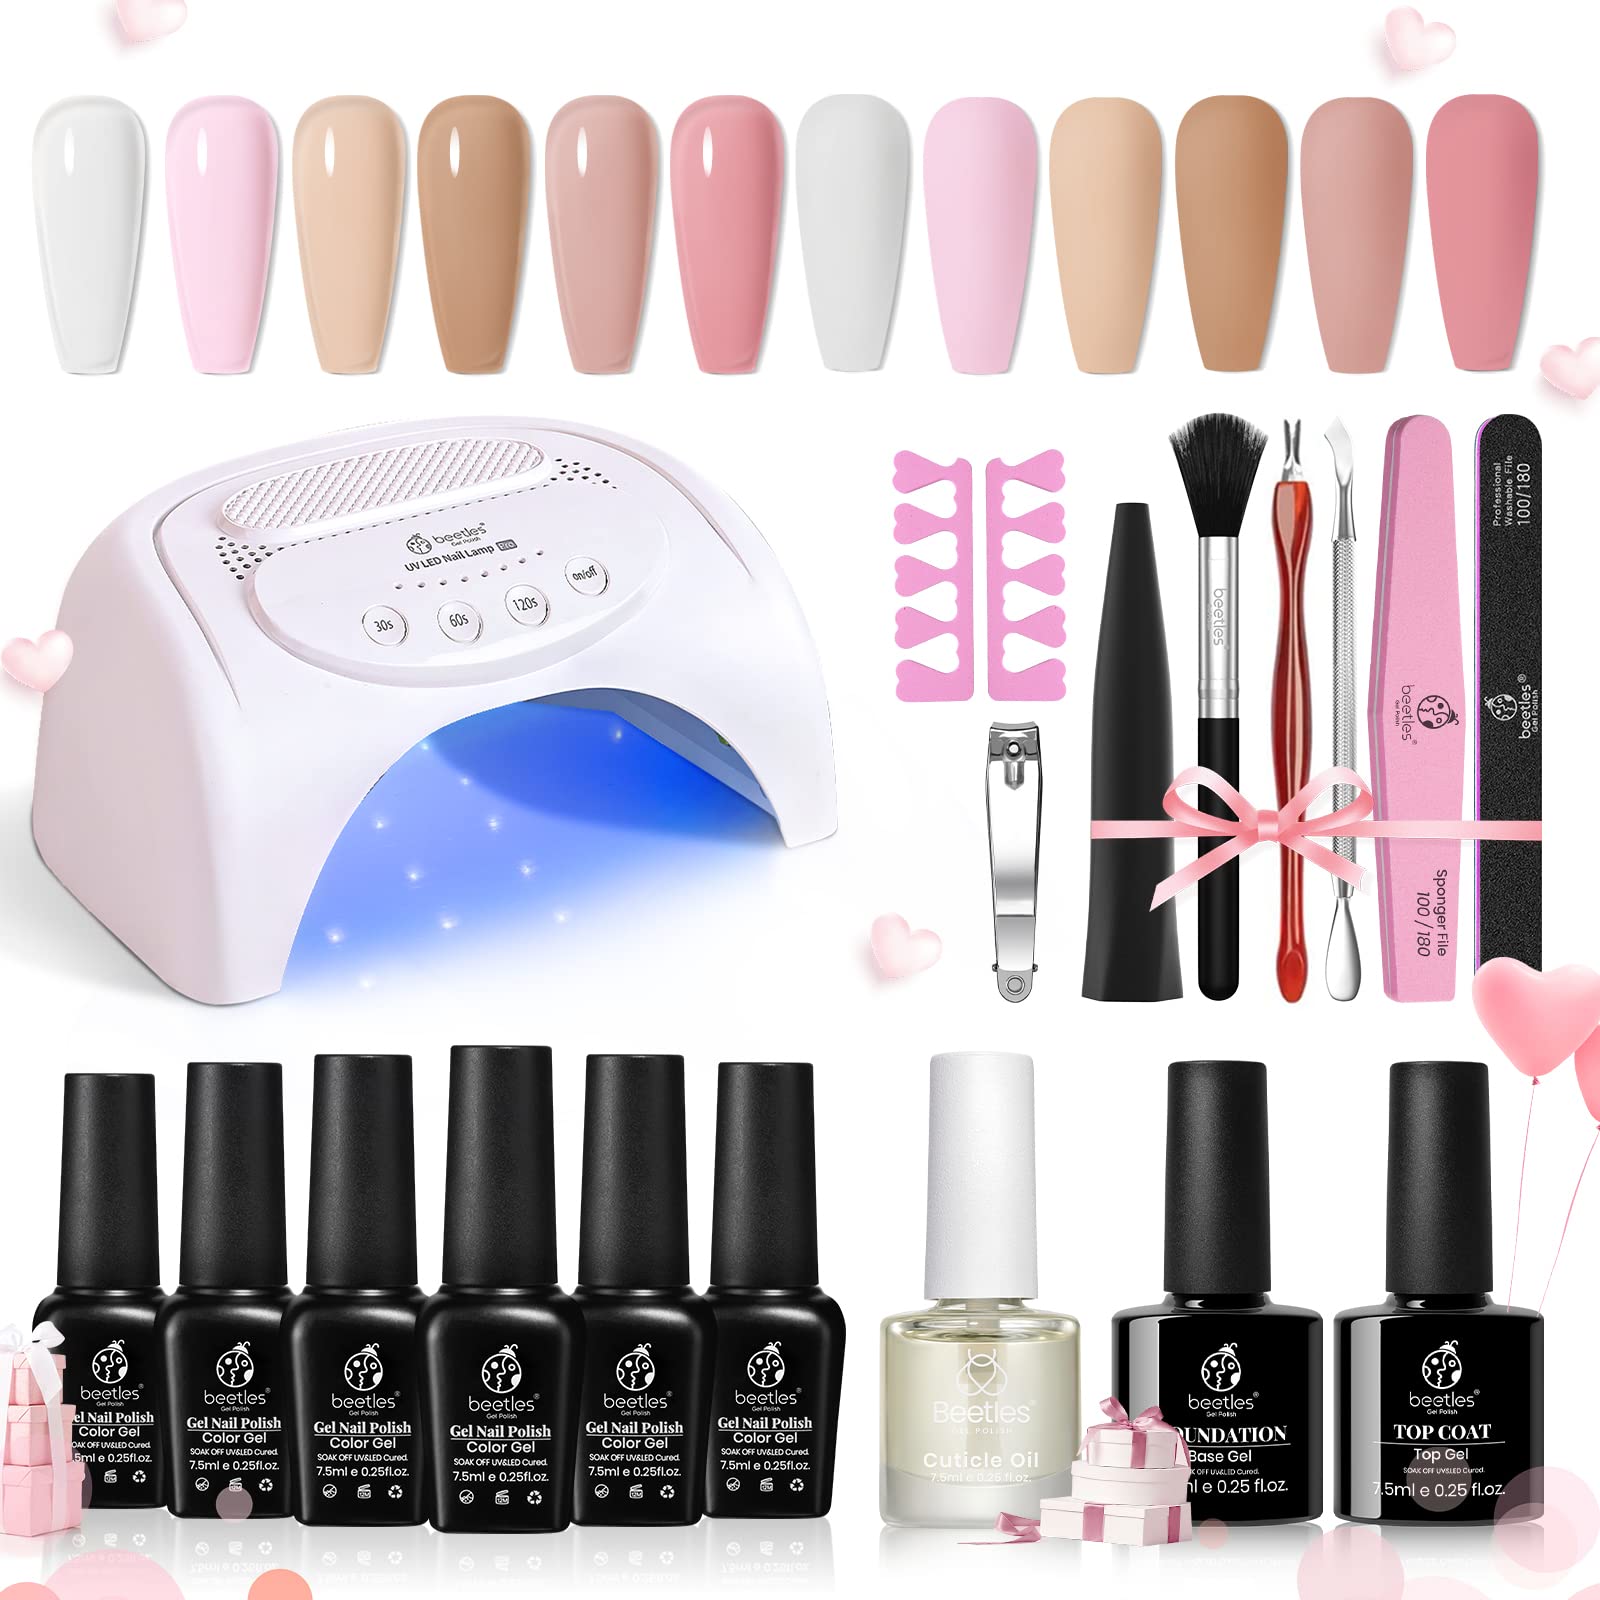 Best Selling Opallac At-Home Gel Polish Kit